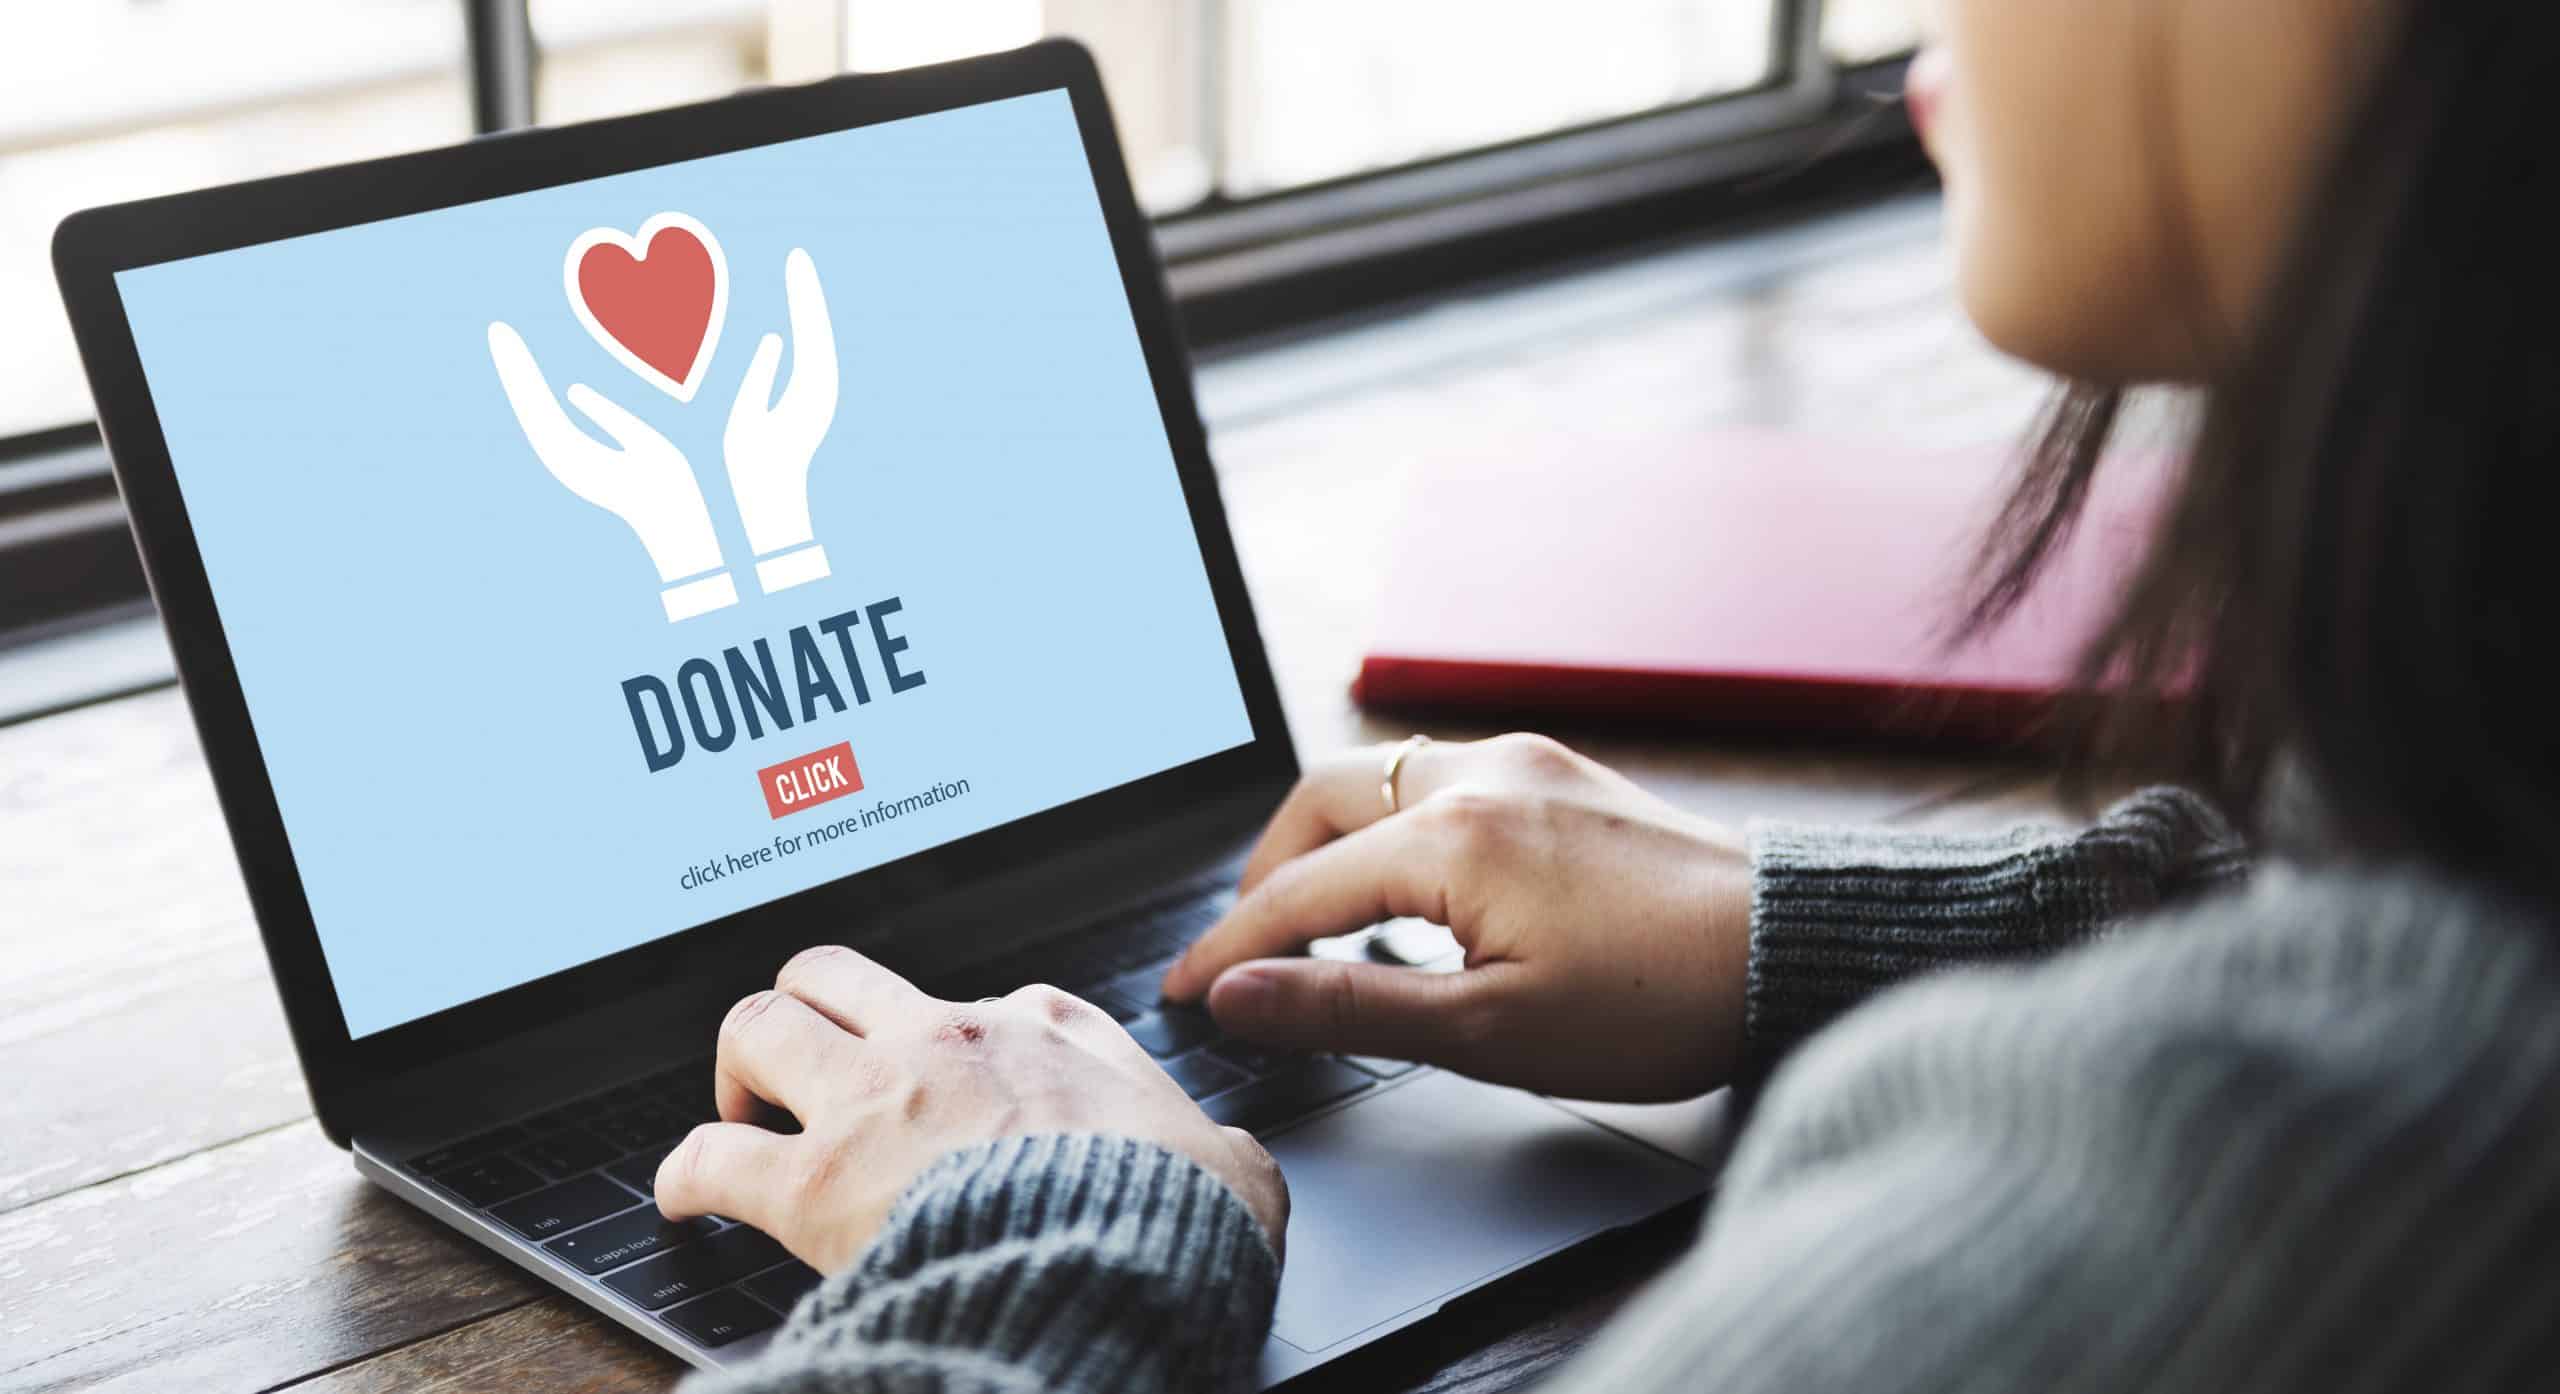 Charity scam on computer